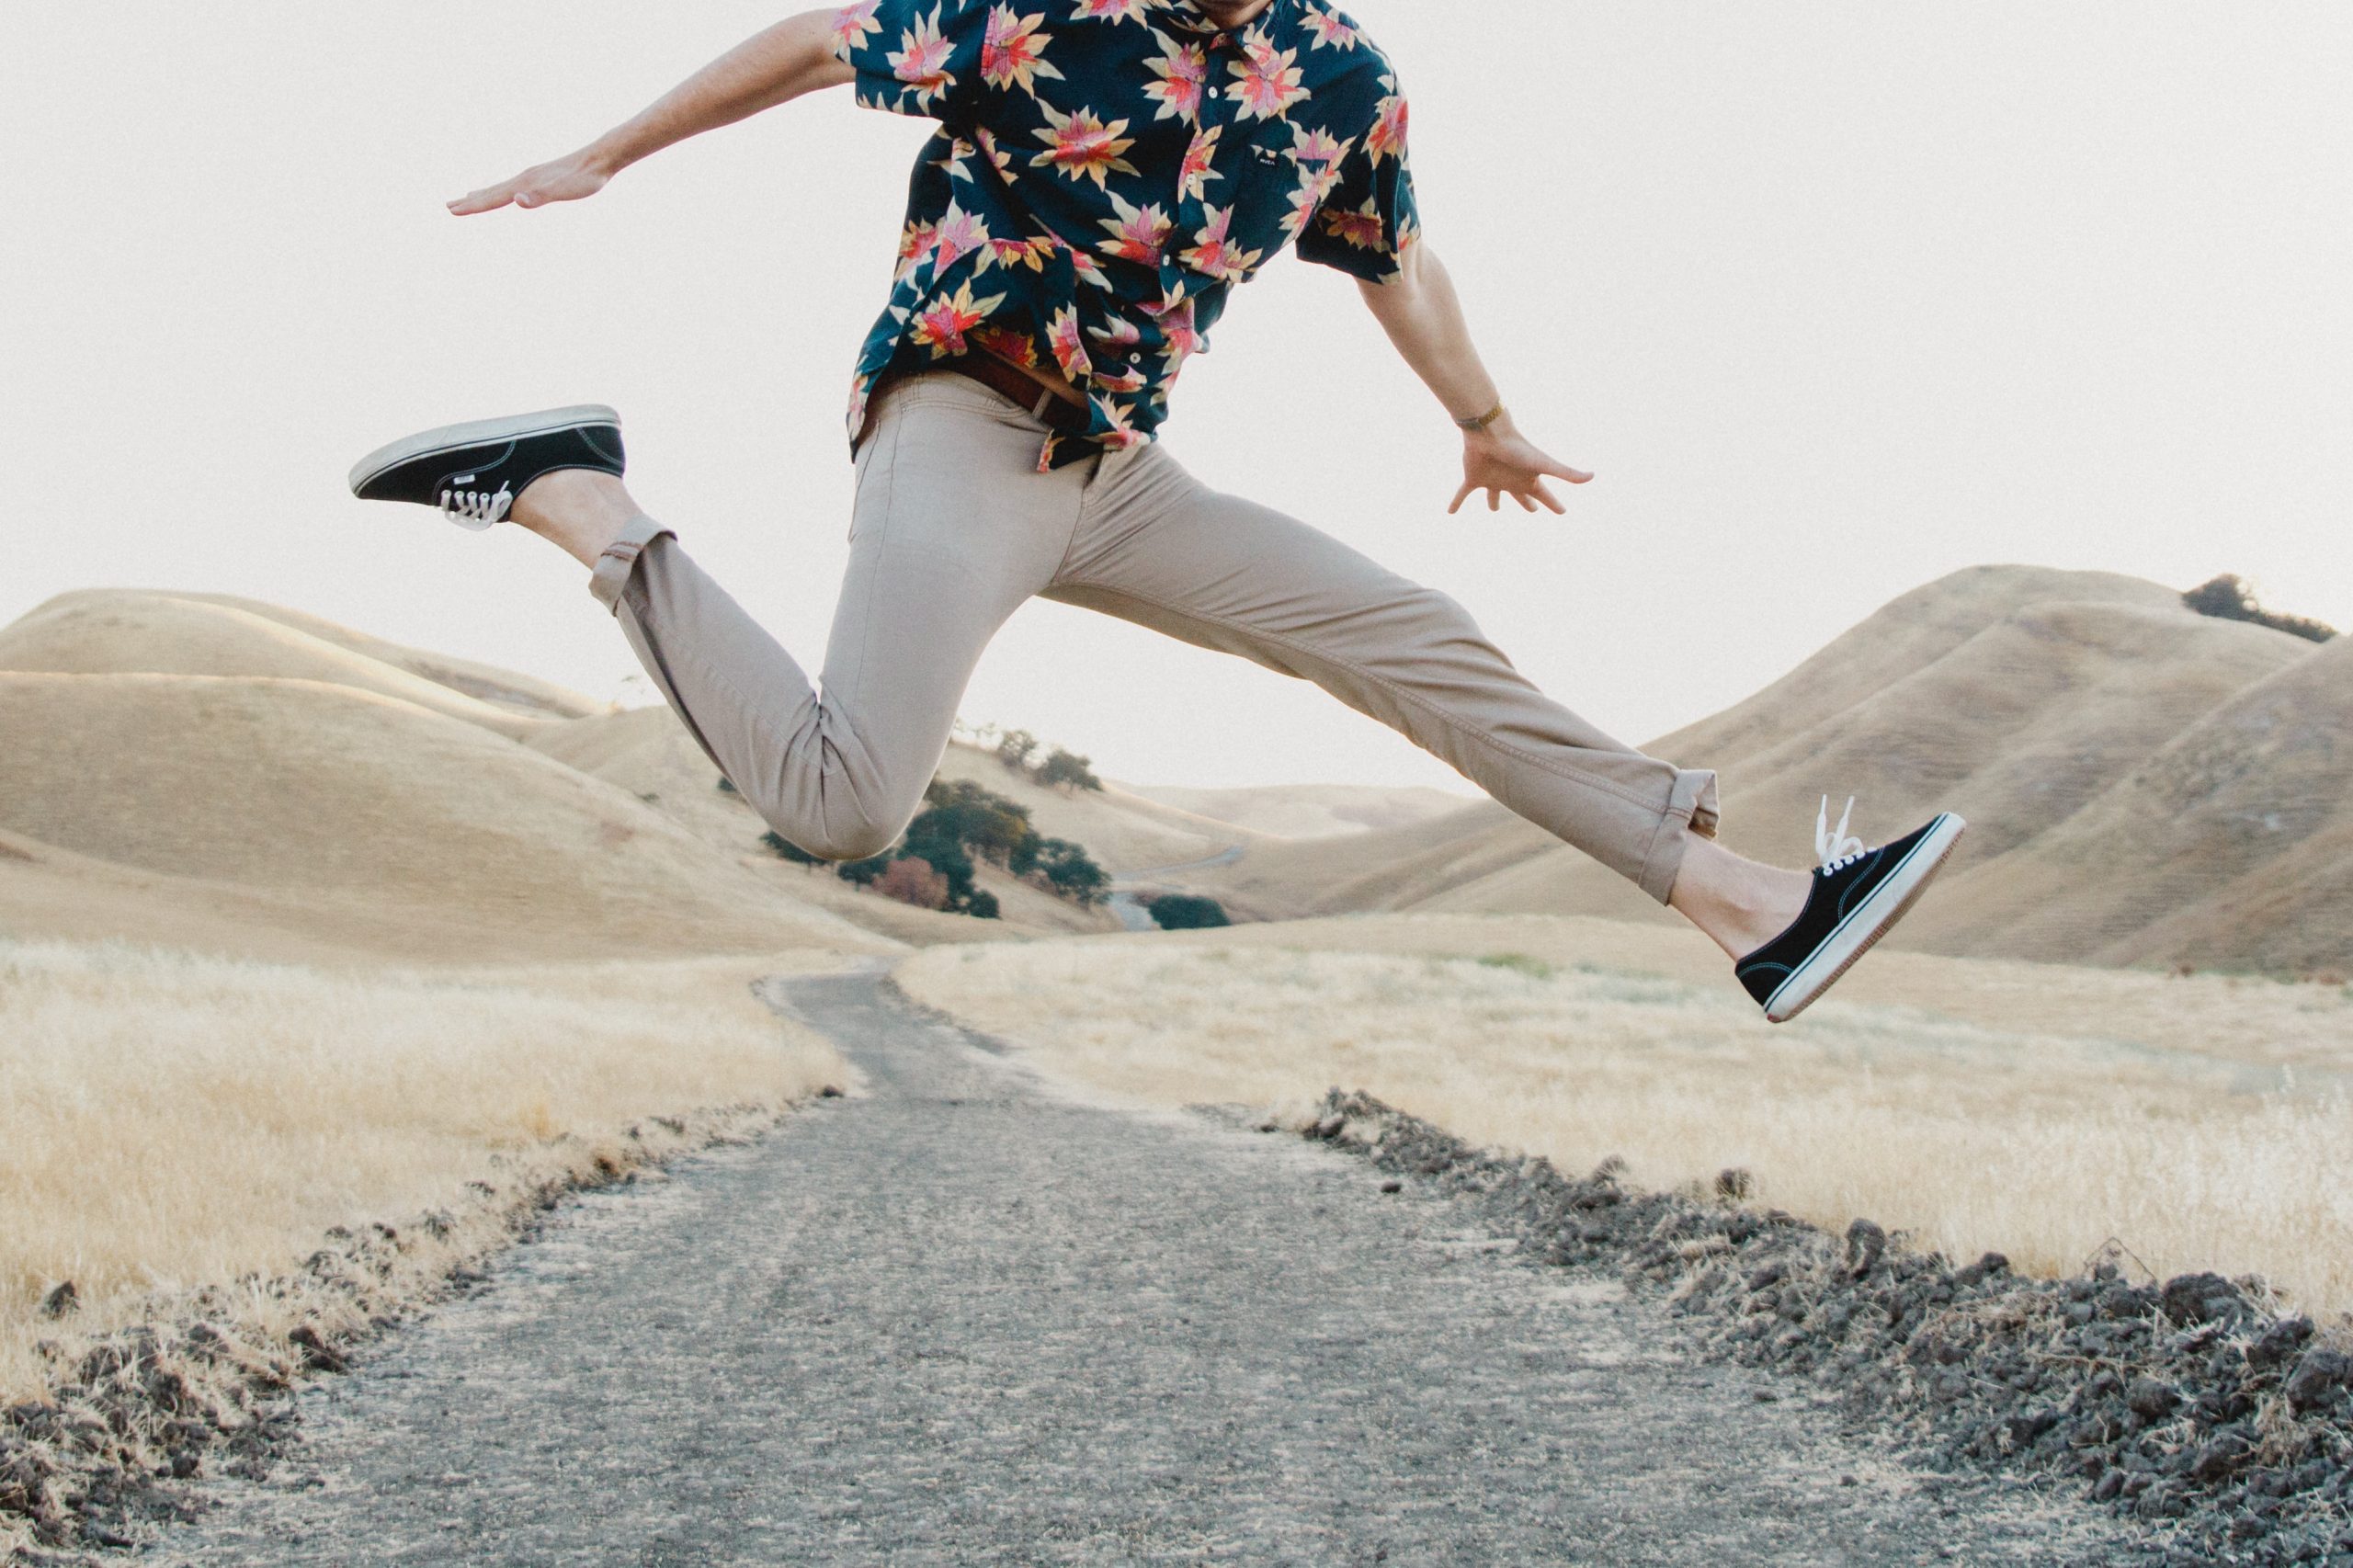 Man in floral shirt leaping over a path on a hilly desolate area.